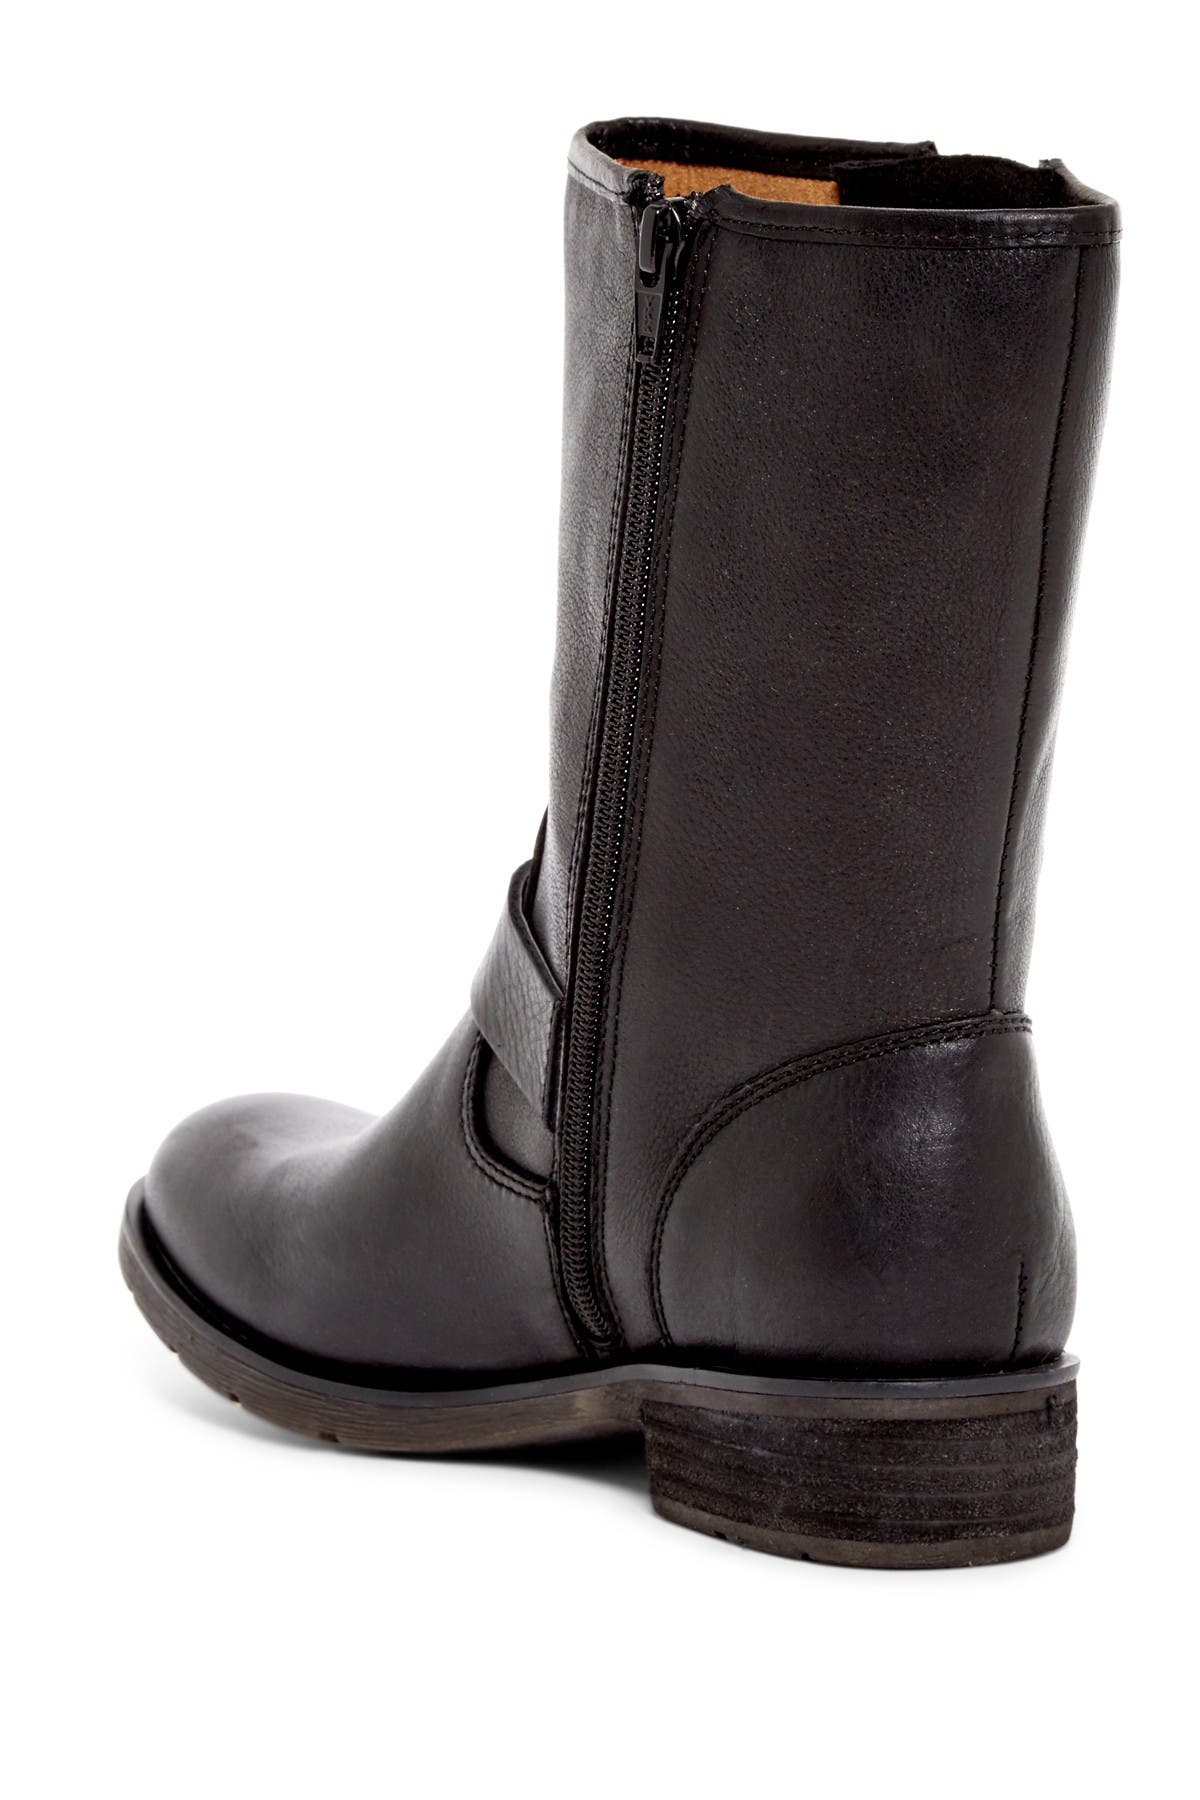 sofft belmont boots